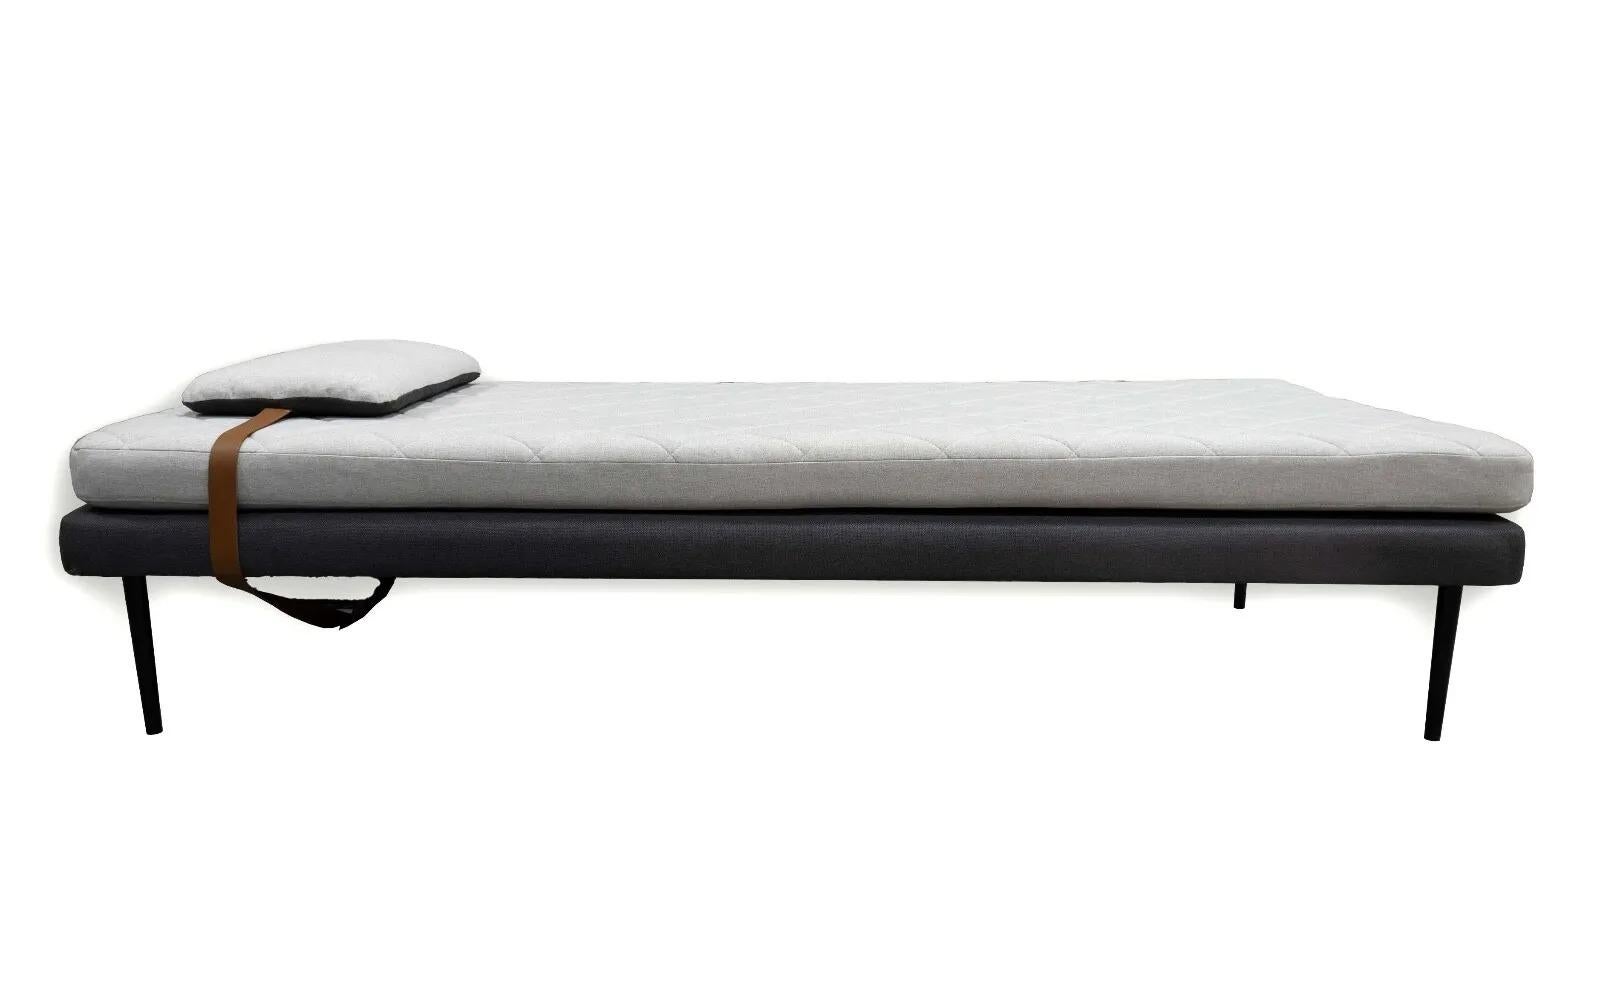 This Contemporary Modern Light Grey Daybed boasts a streamlined design, blending functionality with a minimalist aesthetic. The neutral light grey upholstery is elegantly accented by a diamond-stitched pattern, adding a subtle texture and depth to